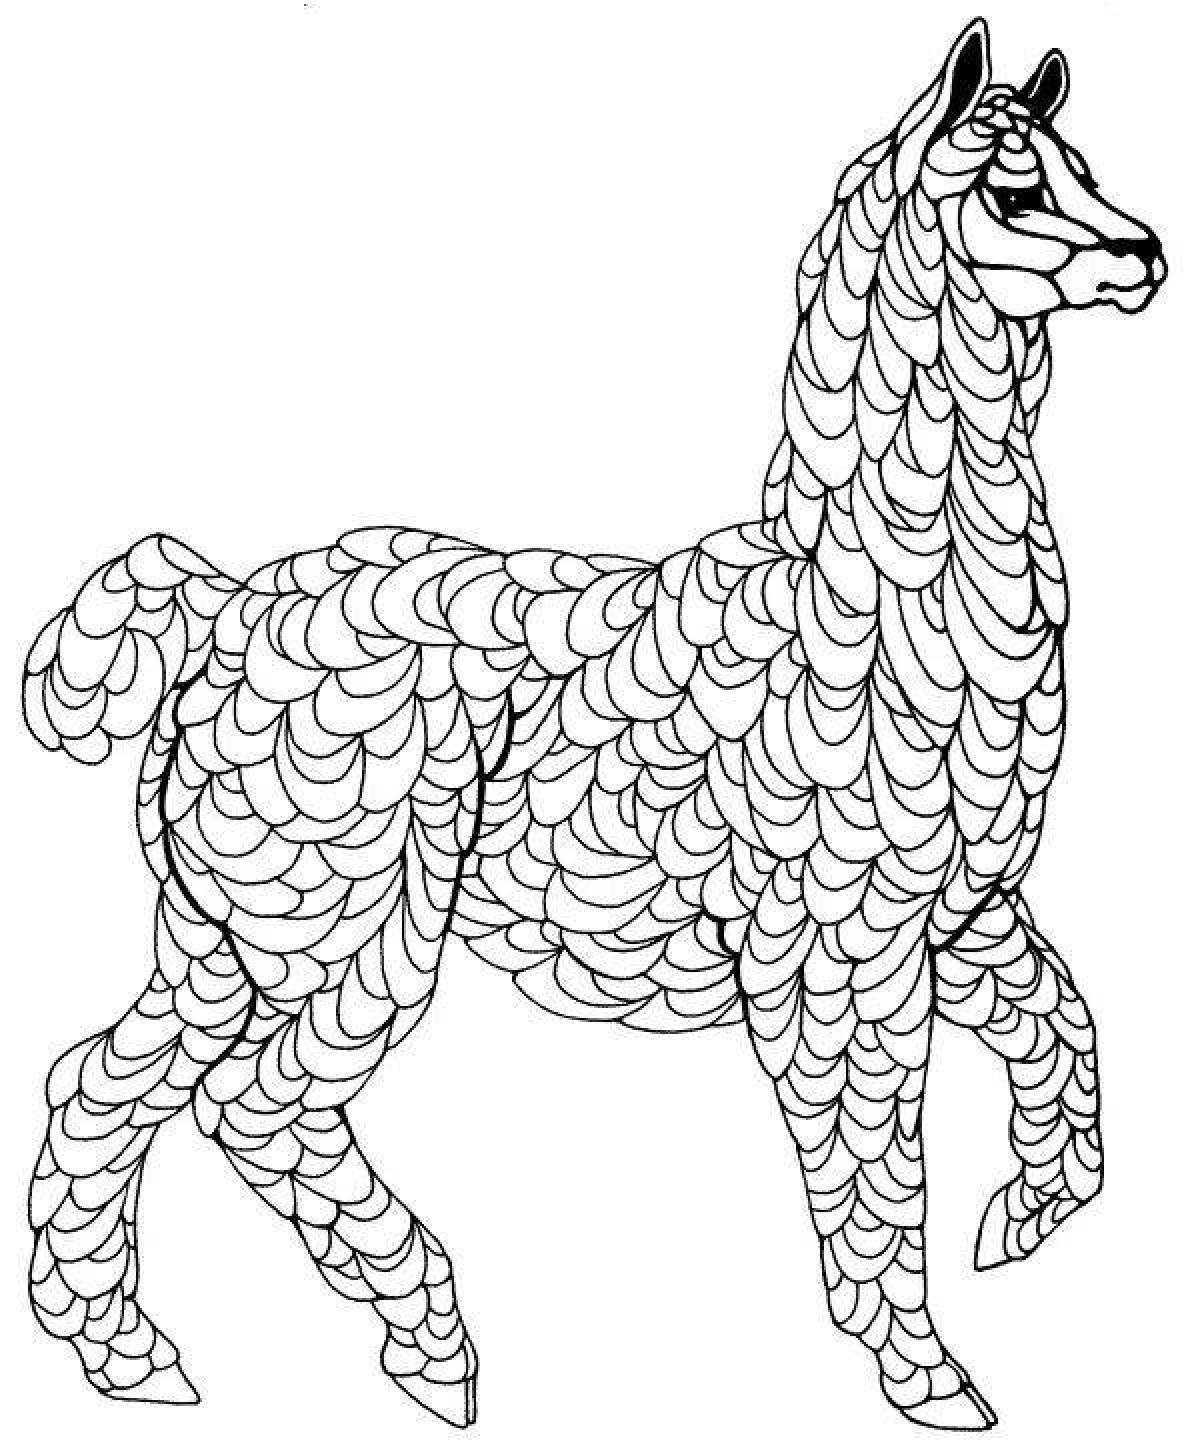 An animated alpaca coloring page